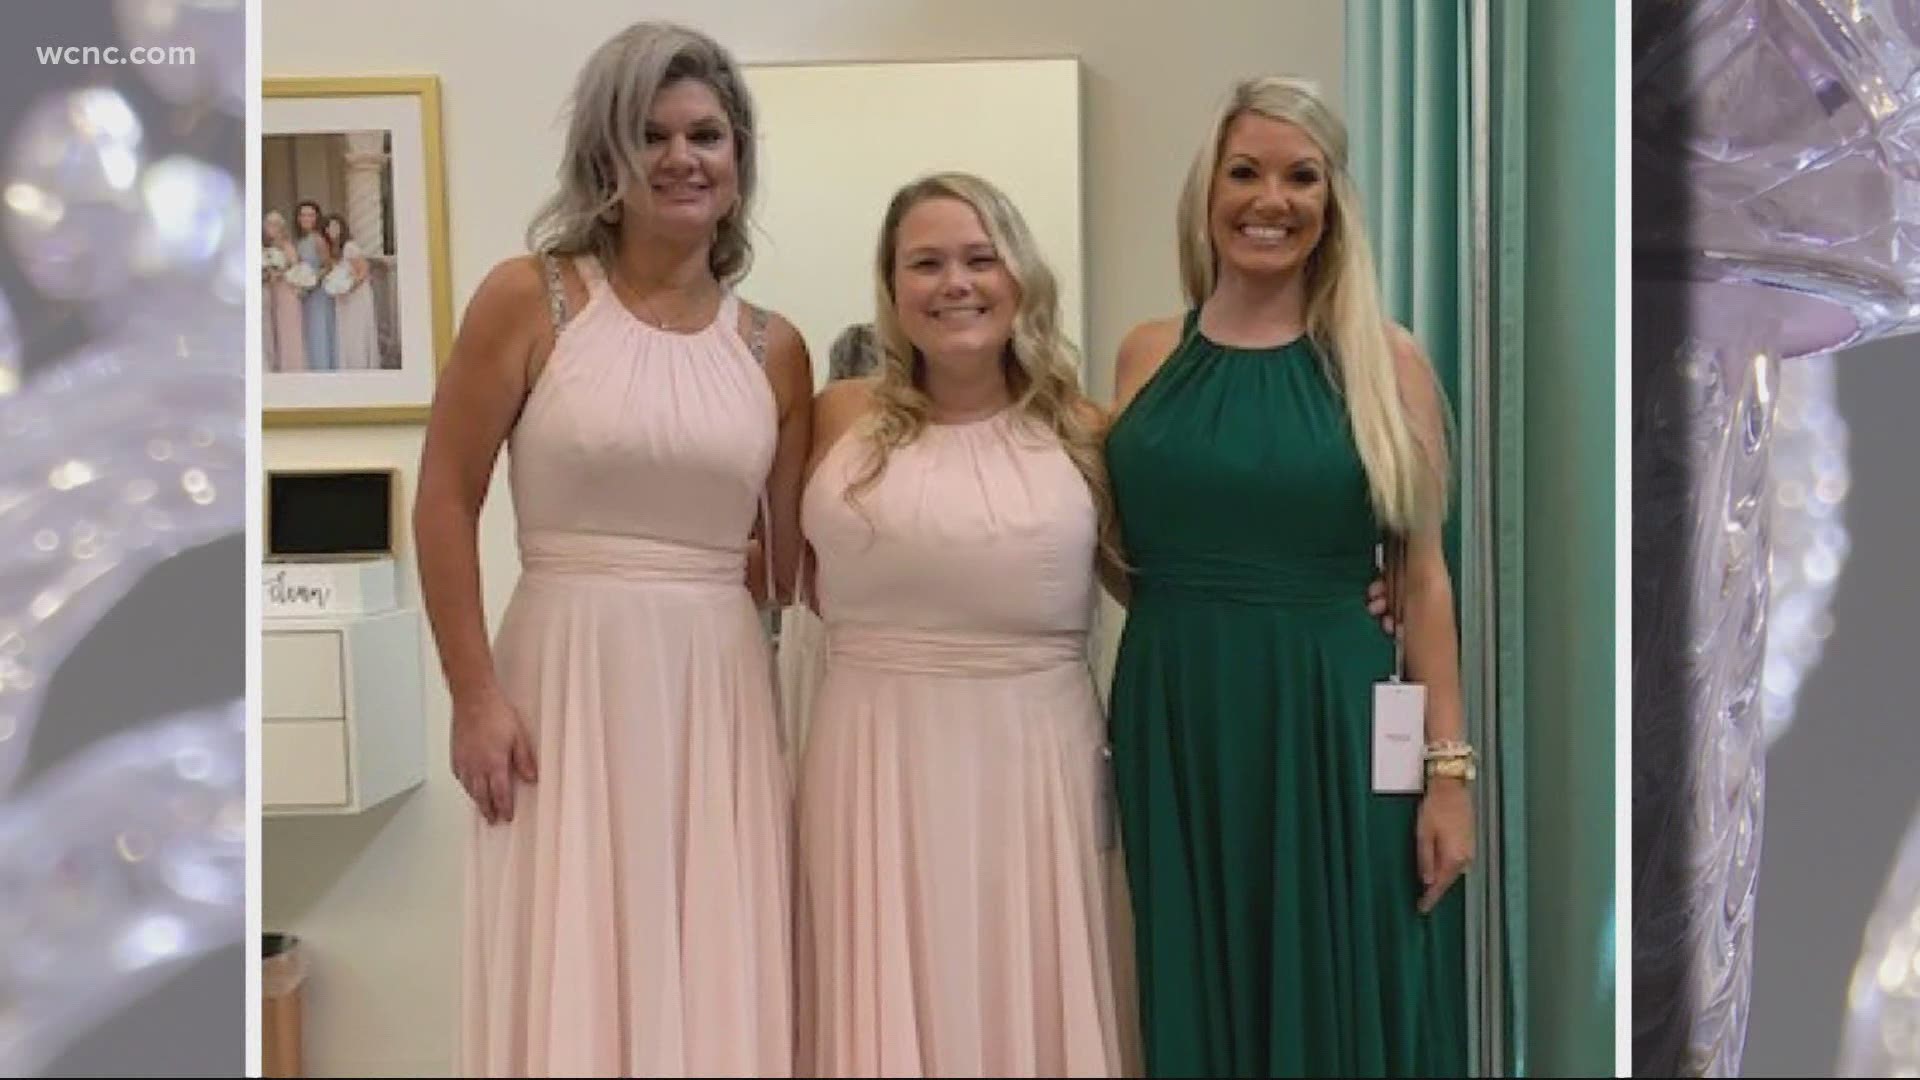 3 bridesmaids have been left scrambling after the Charlotte store where they bought their dresses suddenly closed with only a few months to go until the wedding.